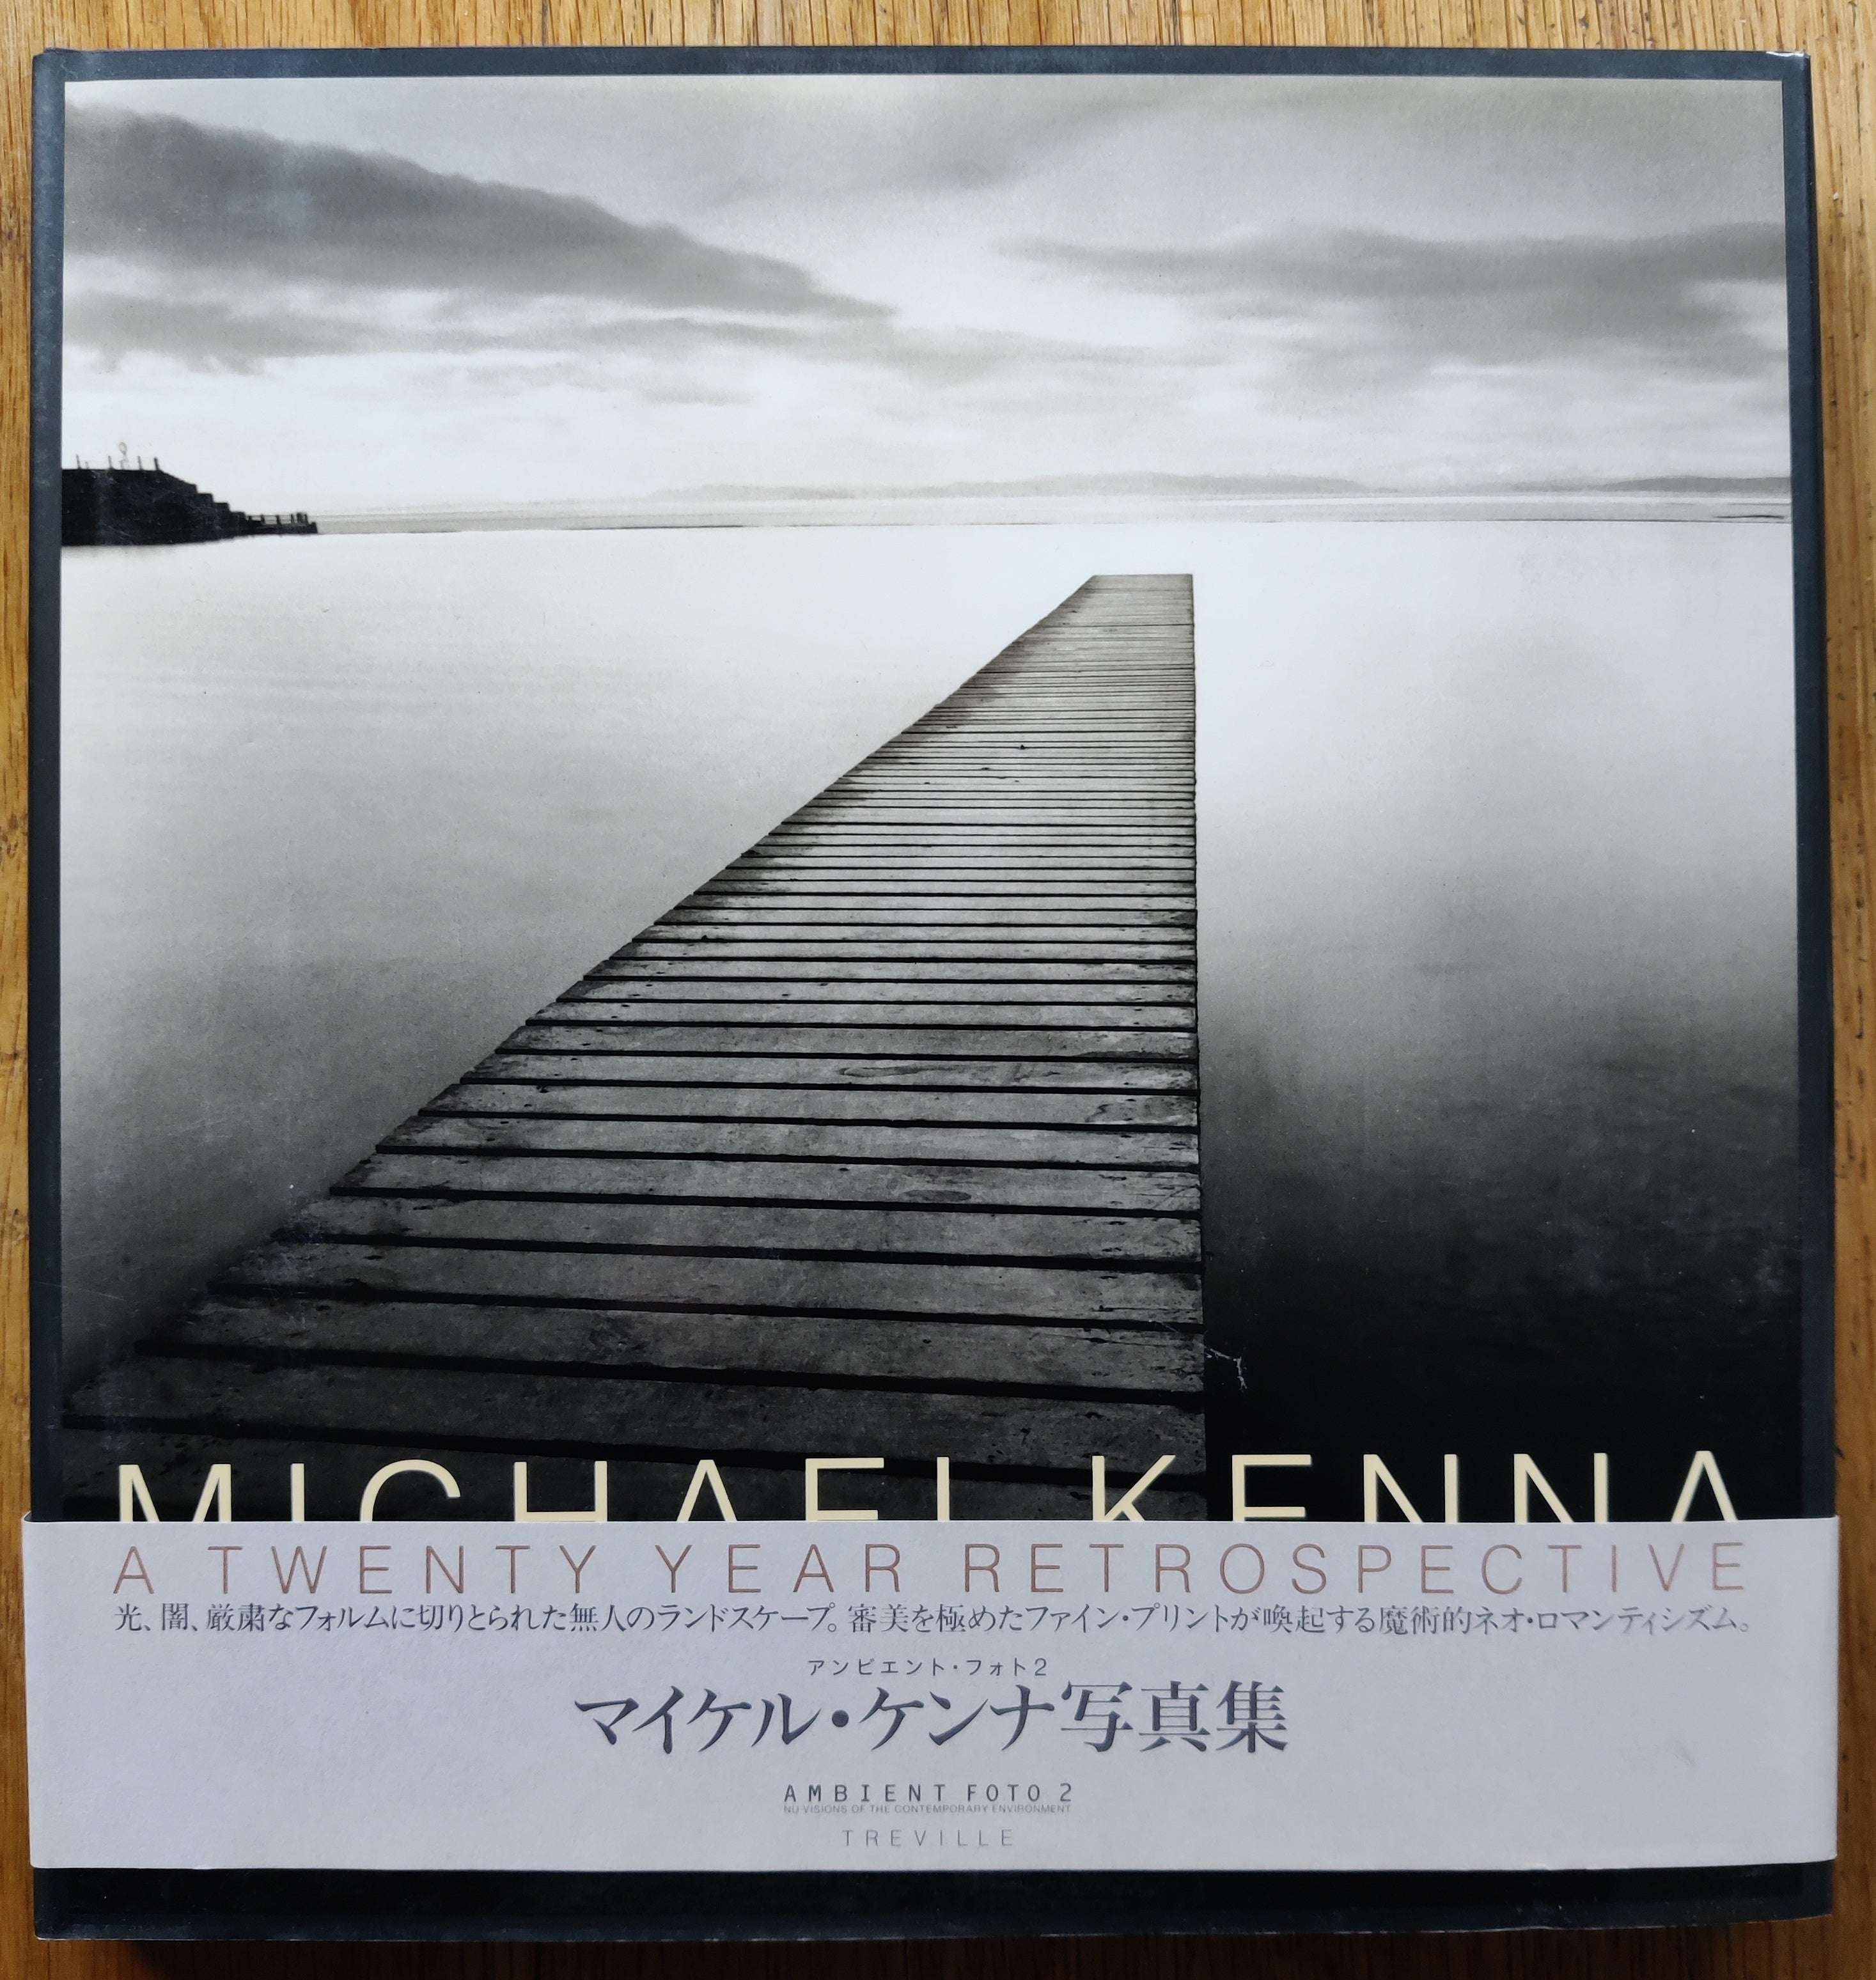 Buy Michael Kenna books | Buy and collect photography books and